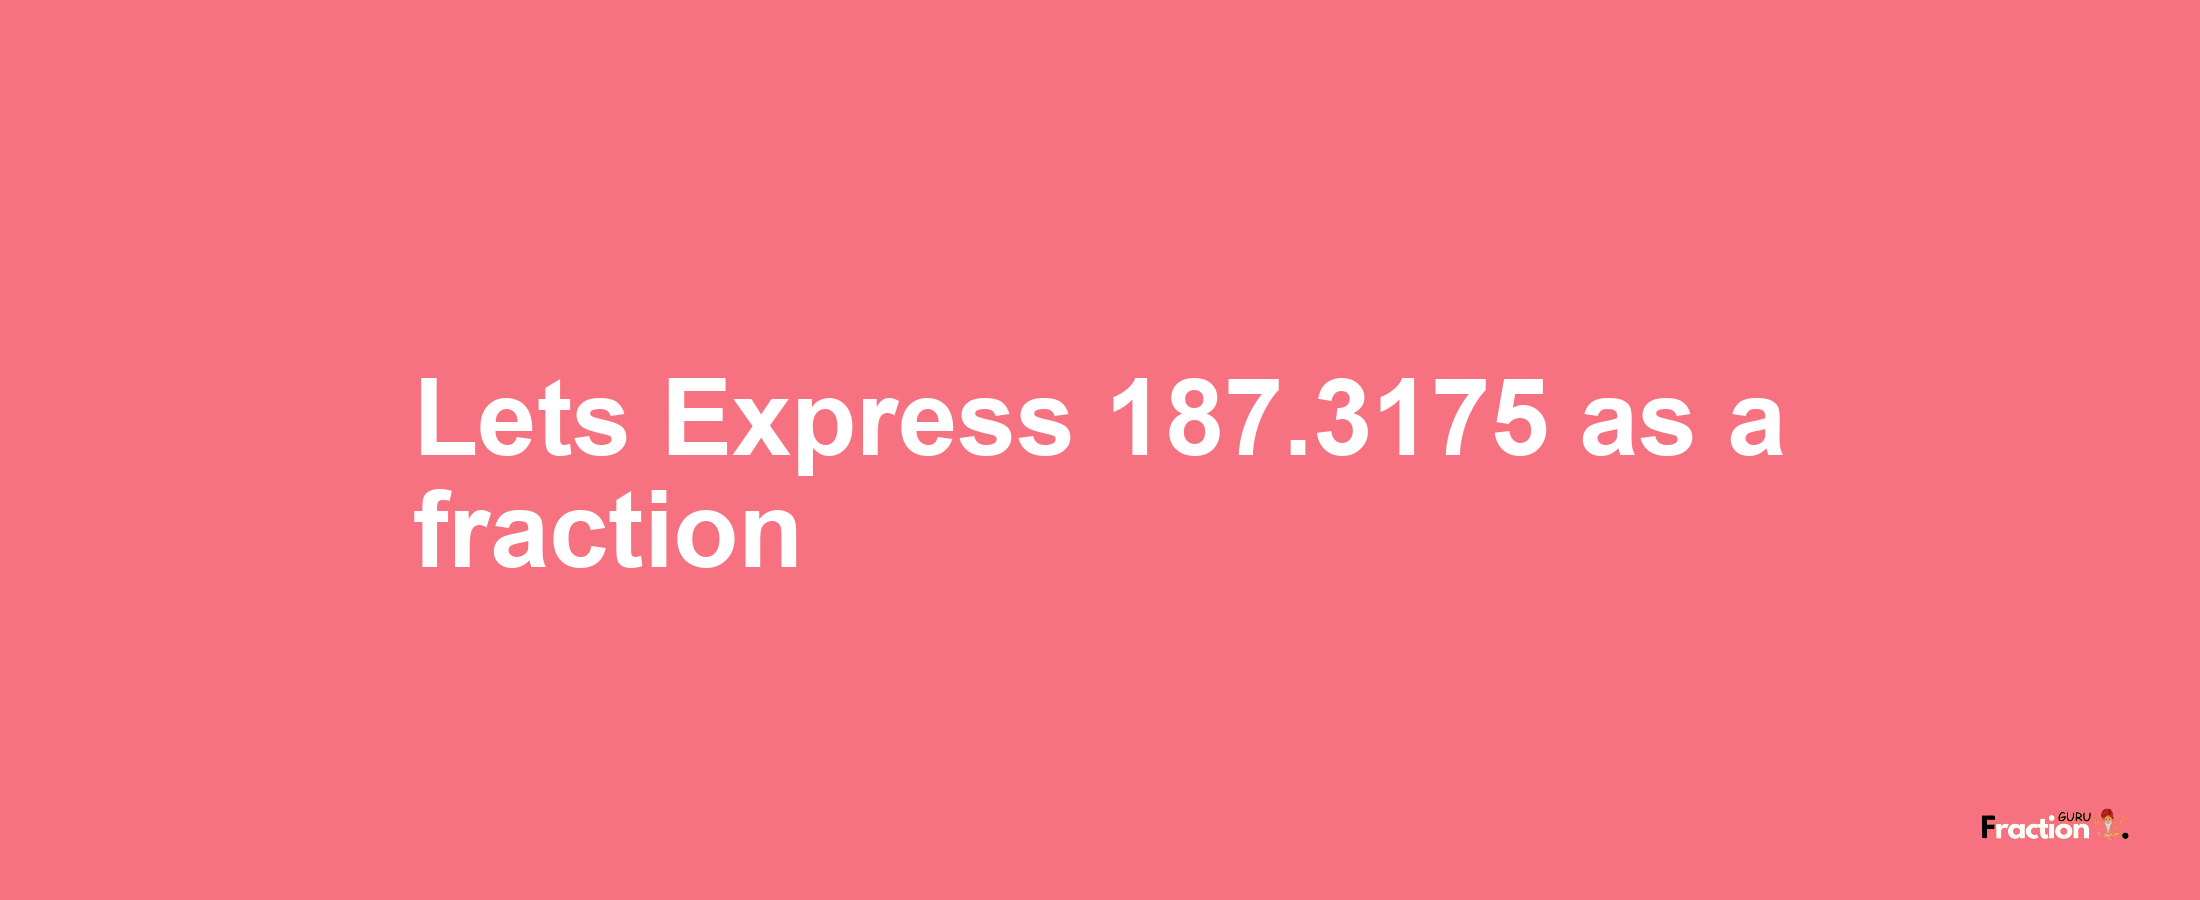 Lets Express 187.3175 as afraction